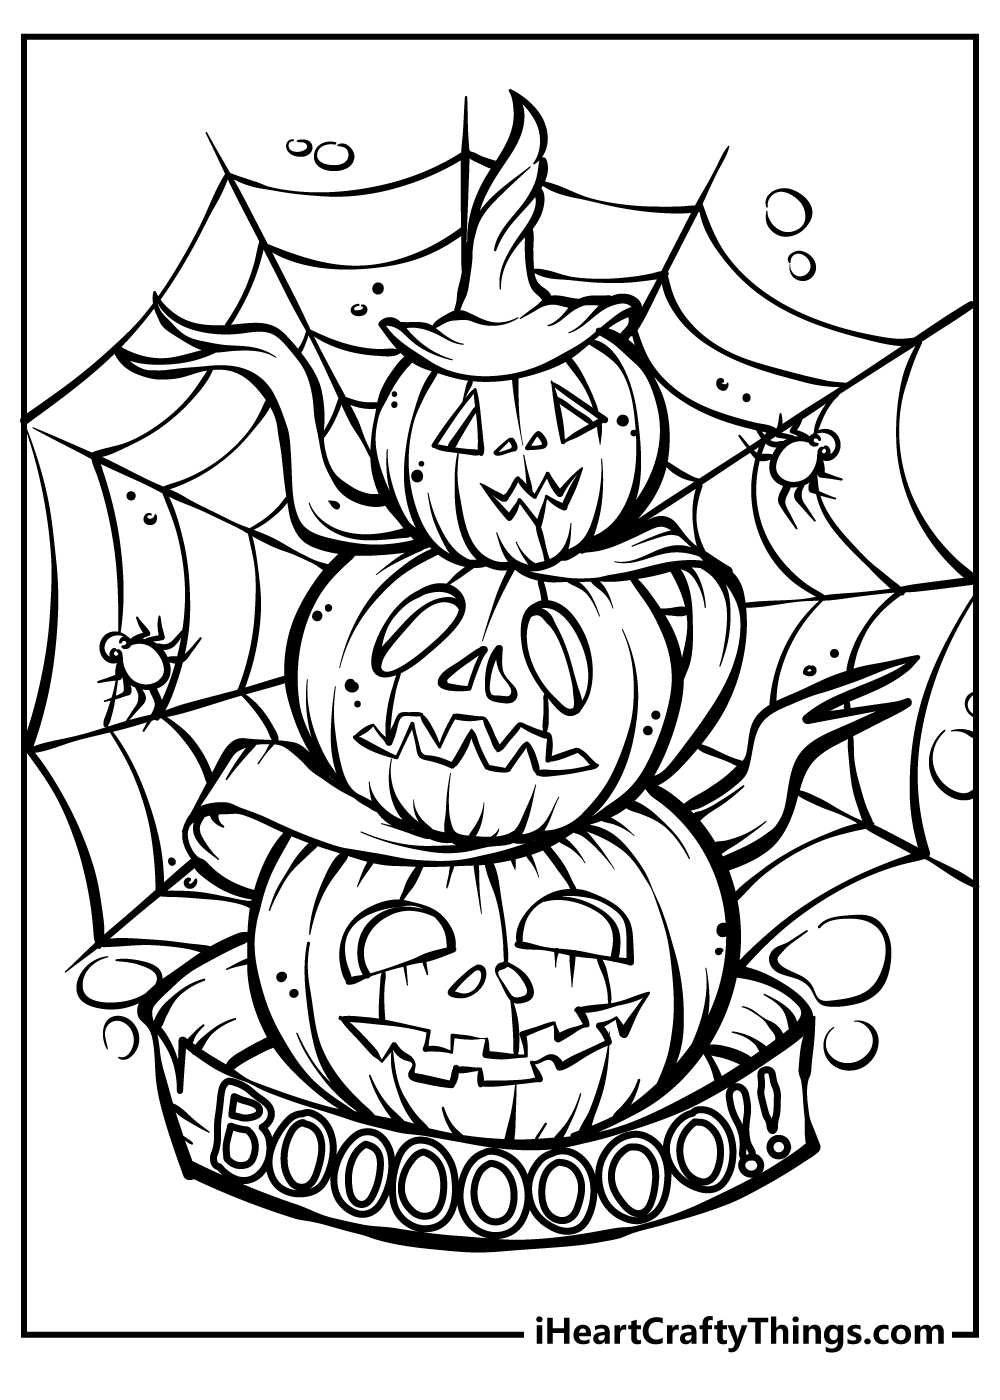 Halloween Coloring Pages for kids free download